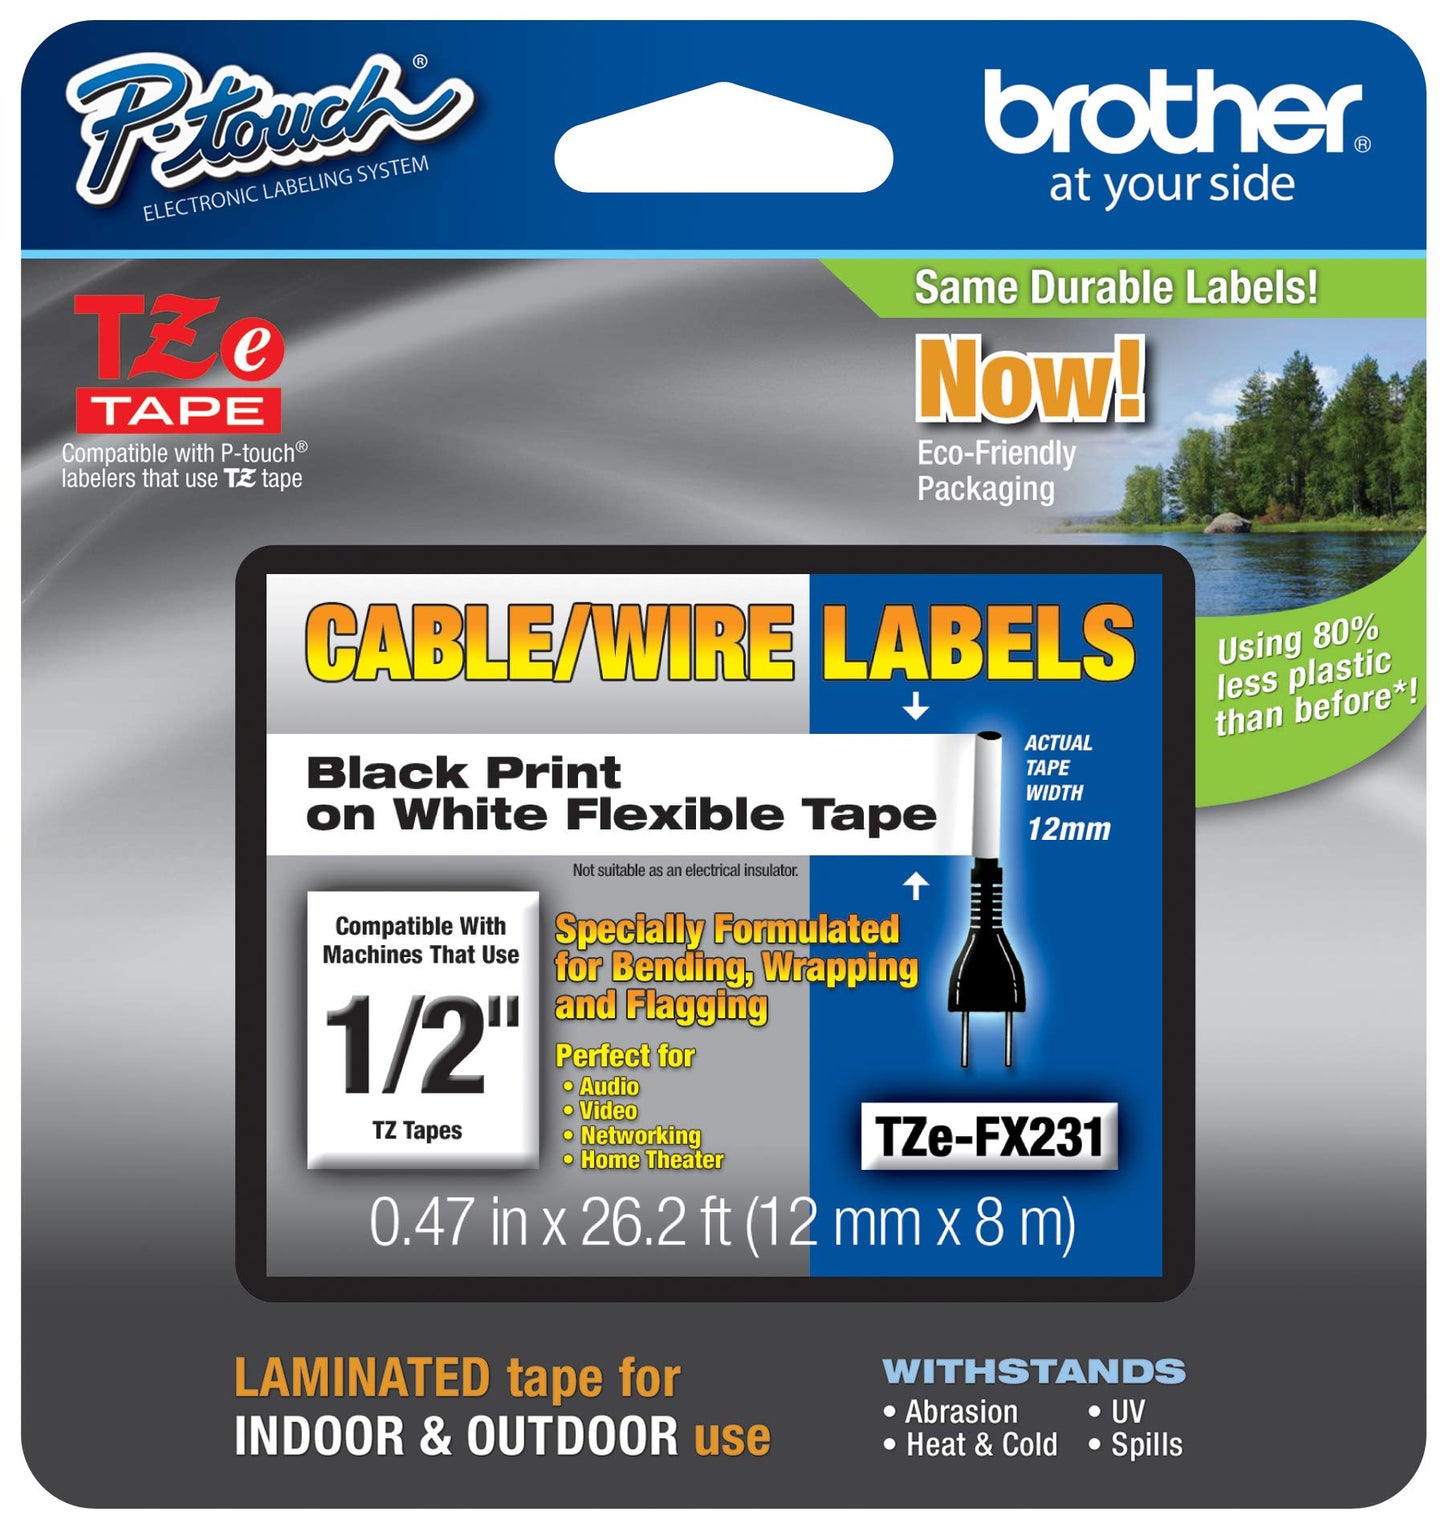 Brother Genuine P-touch TZE-MQG35 Tape, 1/2" (0.47") Wide Standard Laminated Tape, White on Lime Green, Laminated for Indoor or Outdoor Use, Water-Resistant, 0.47" x 16.4' (12mm x 5M), TZEMQG39